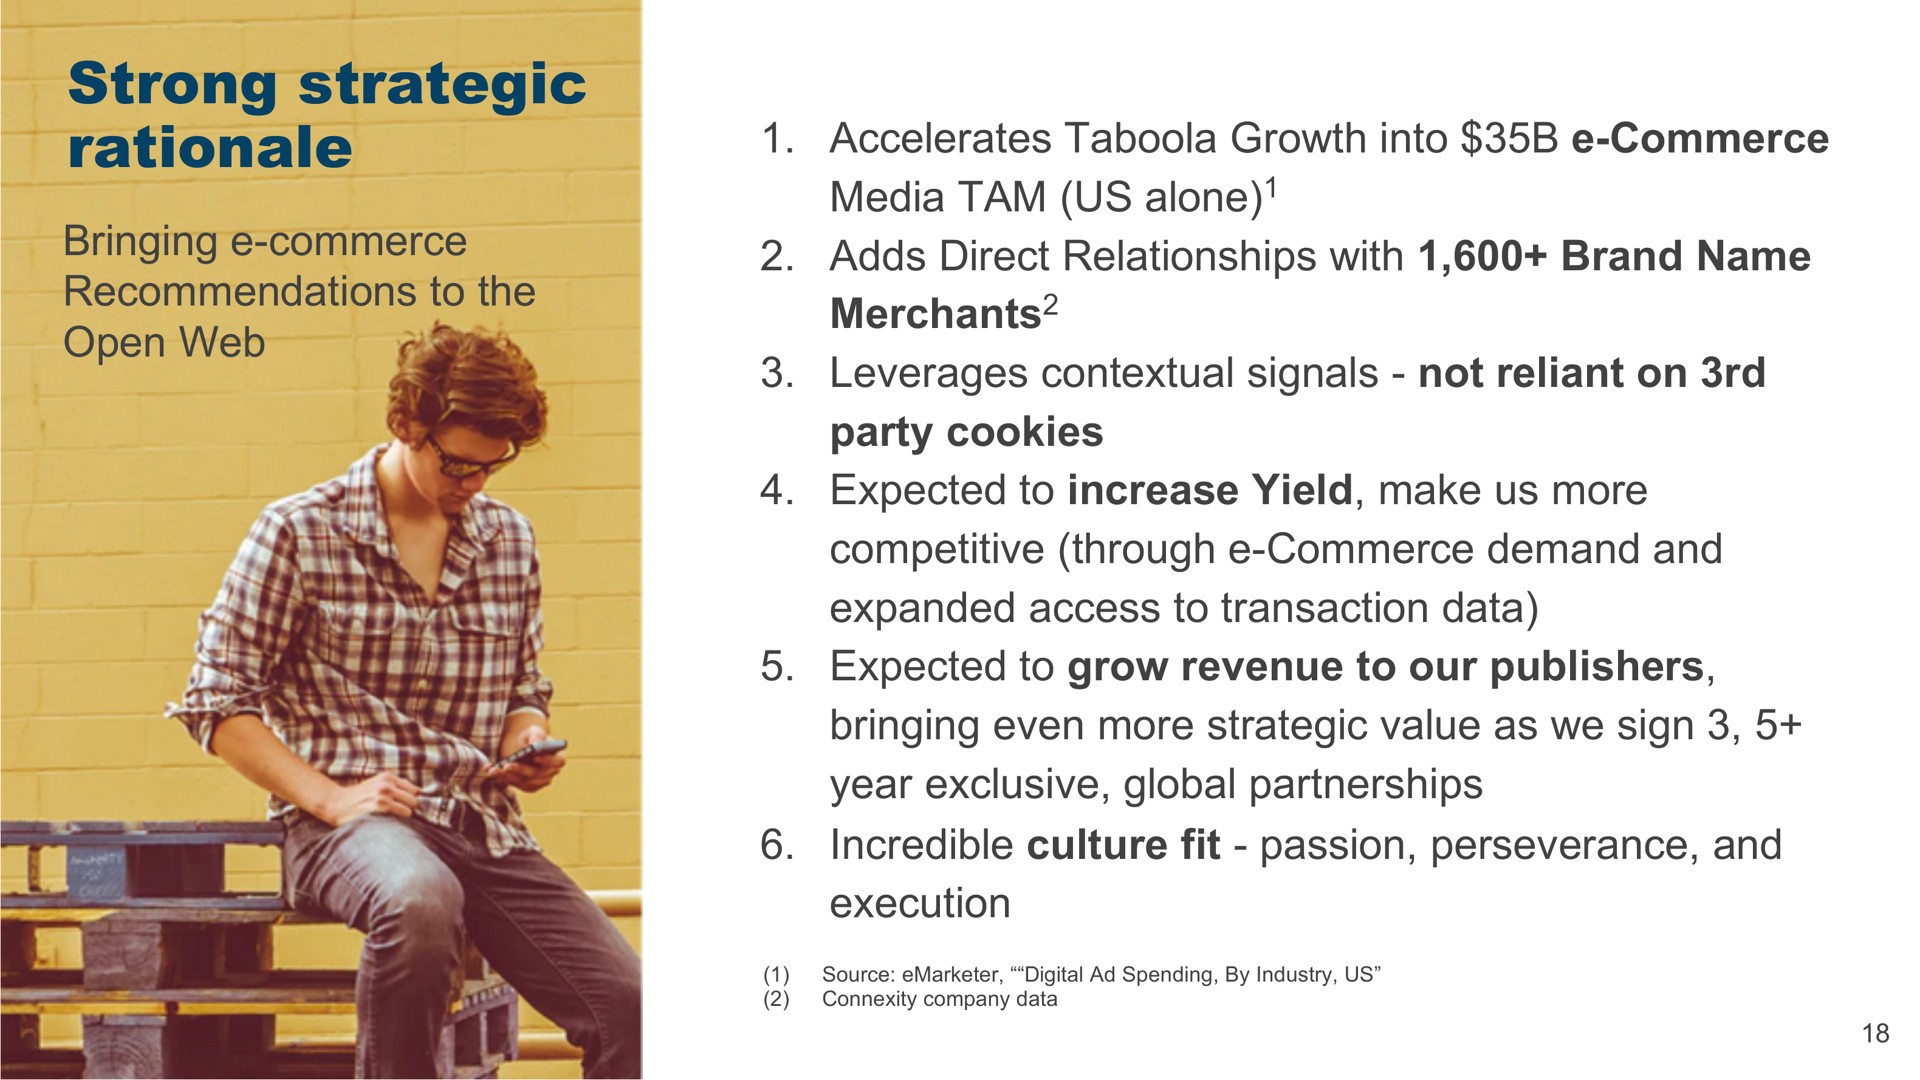 strong strategic rationale | Taboola